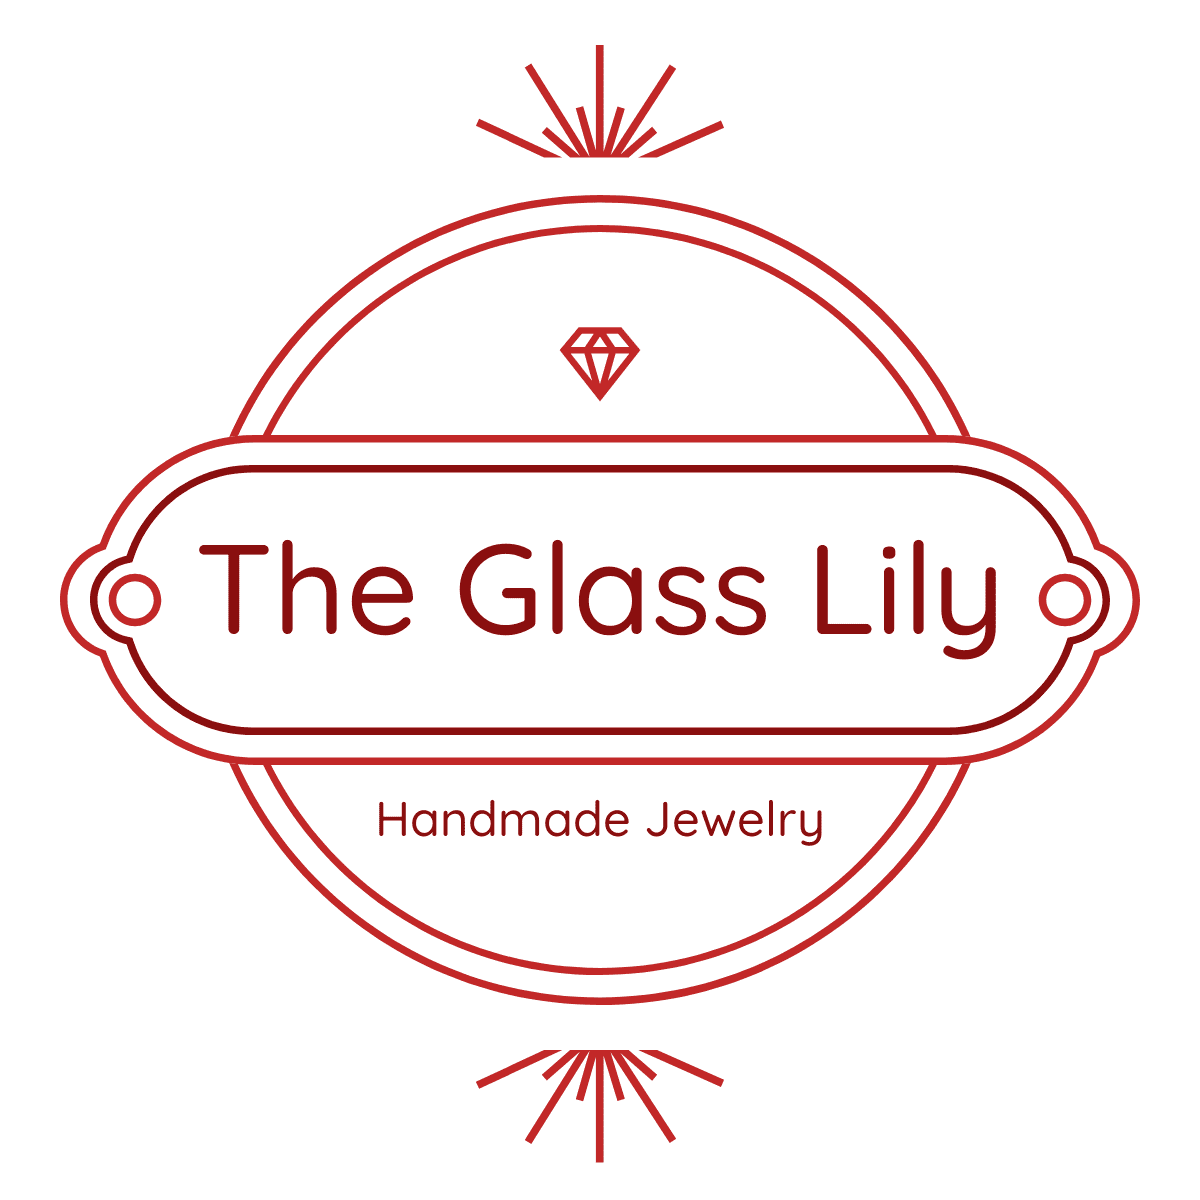 The Glass Lily